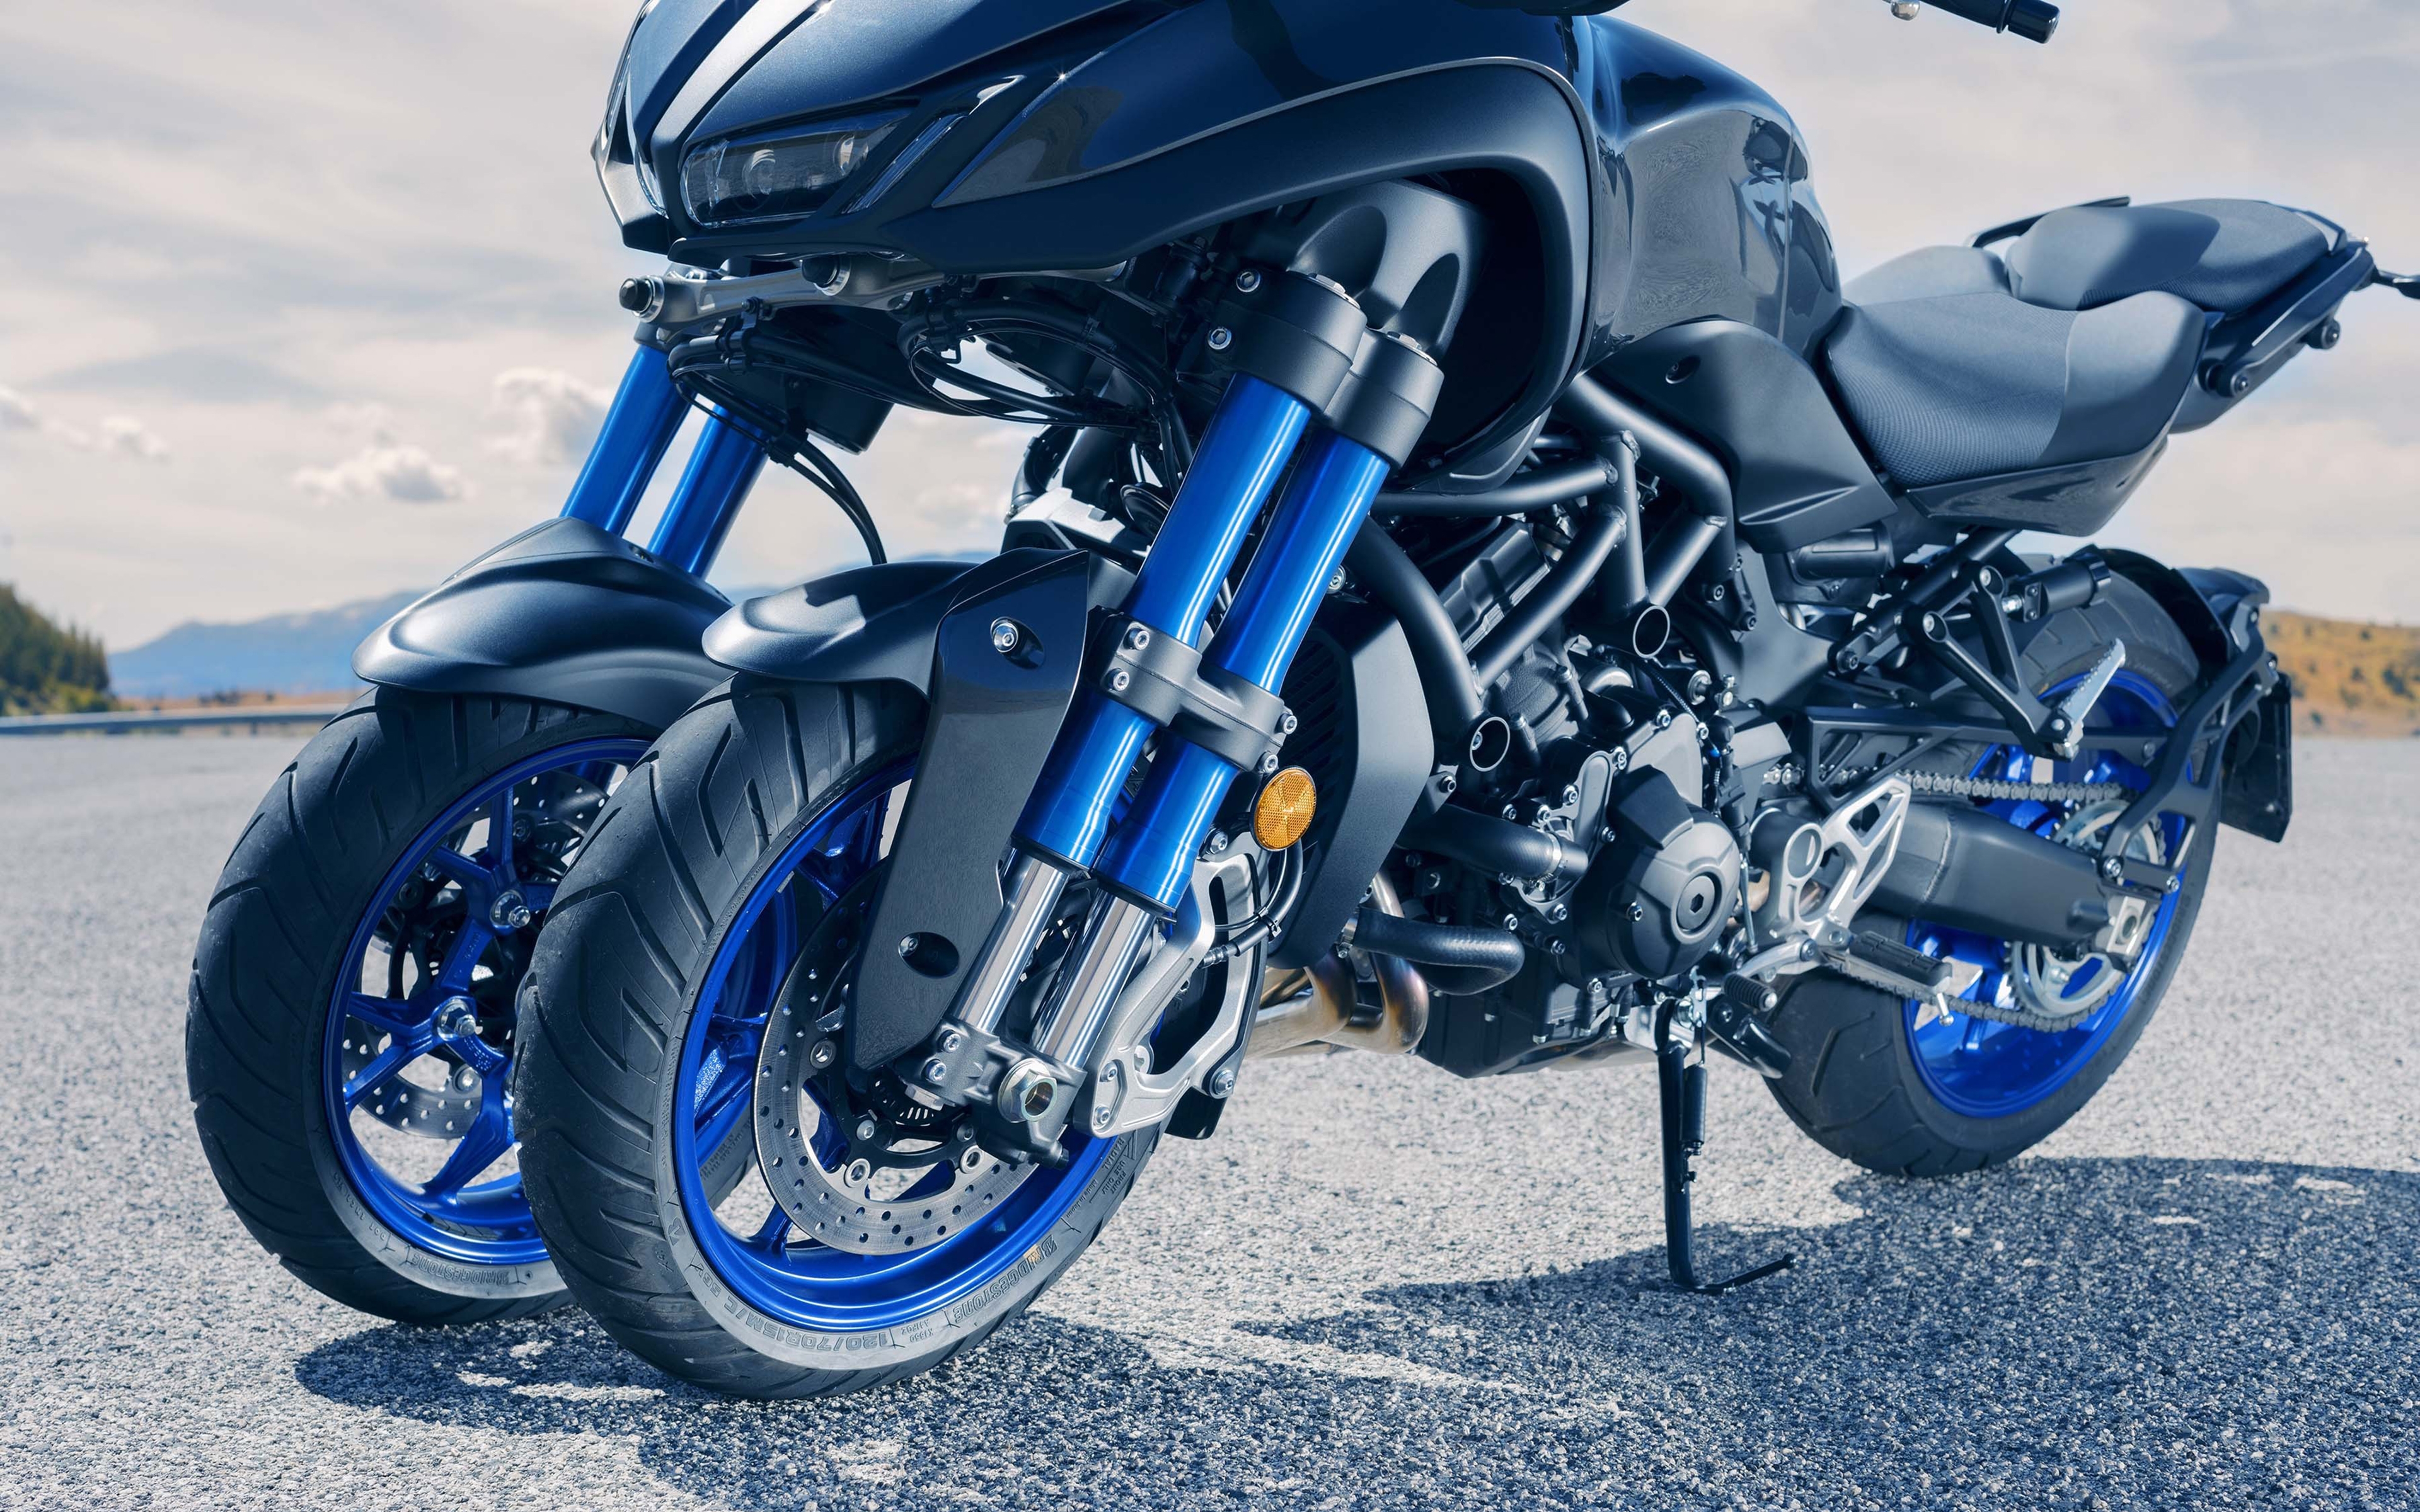 Yamaha niken 2019 motorcycle with two front wheels